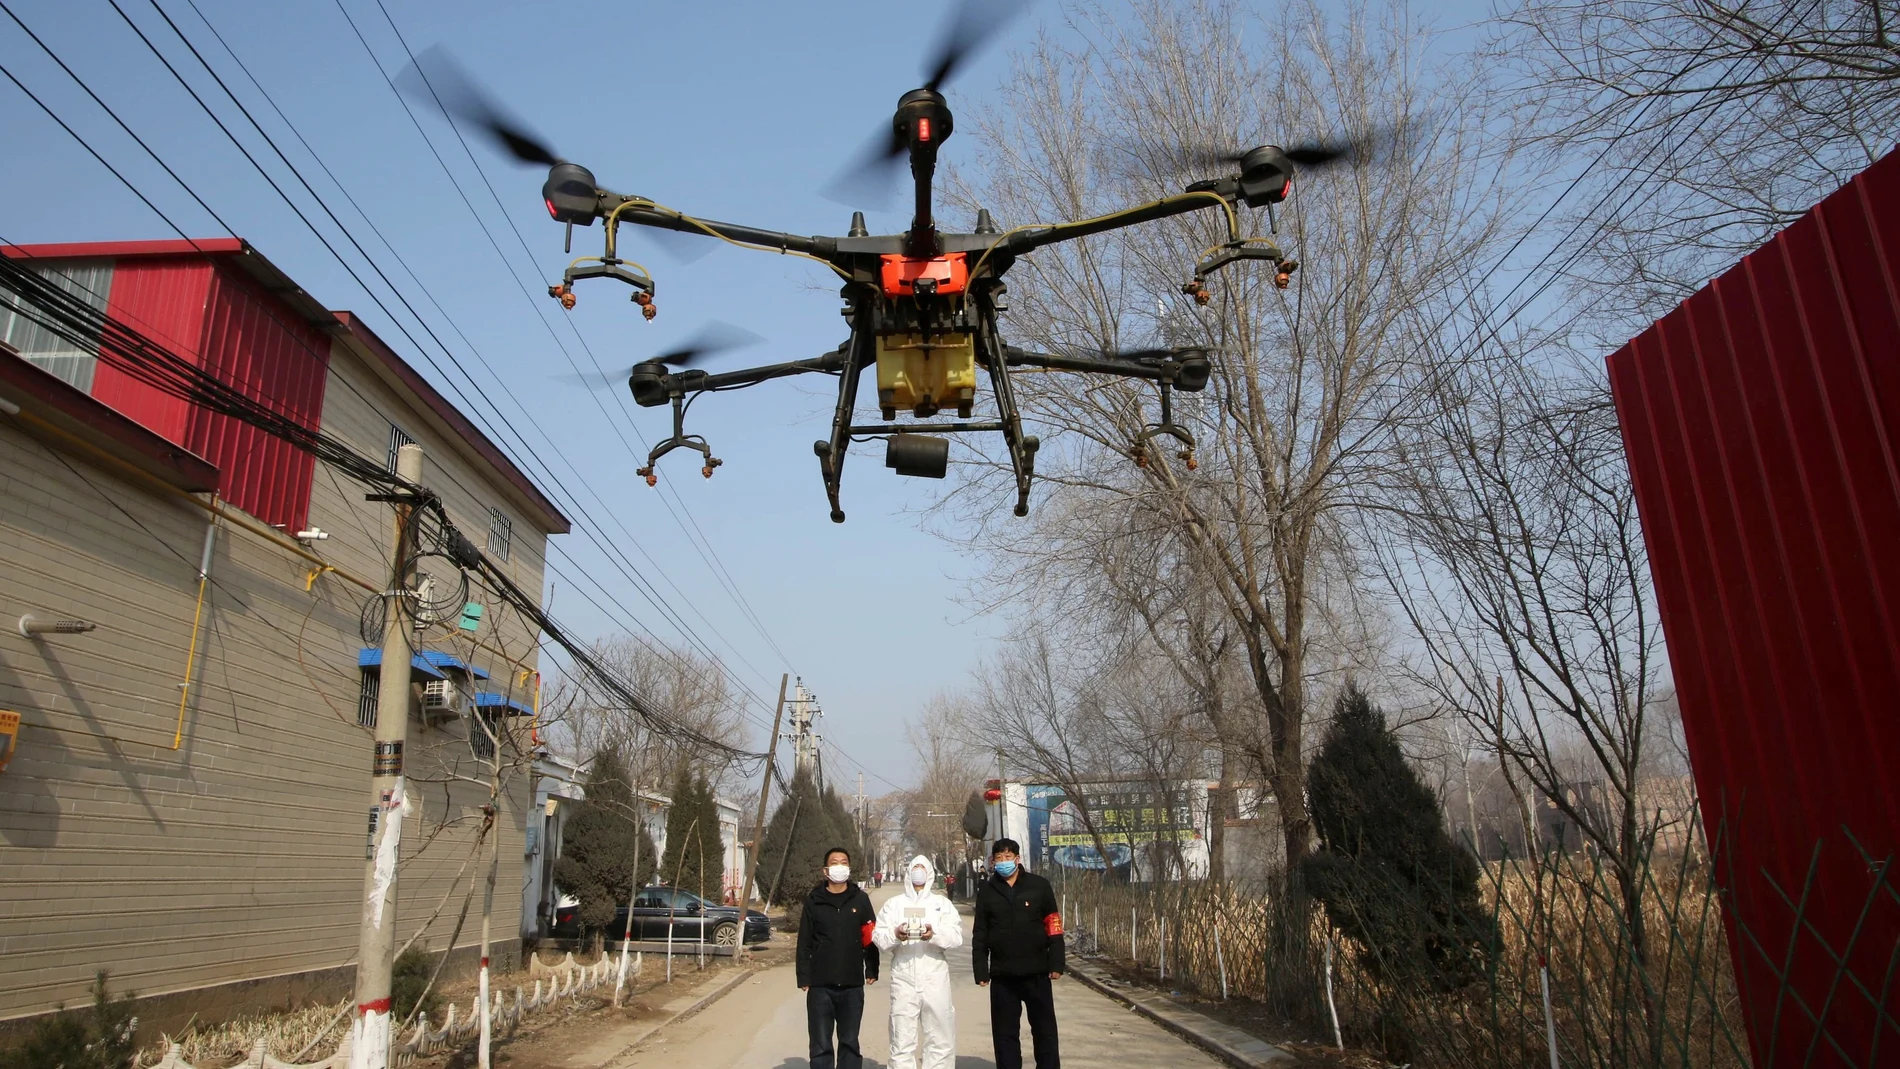 Volunteer in protective suits controls a drone to spray disinfectants at Zhengwan village, as the country is hit by an outbreak of the new coronavirus, in Handan